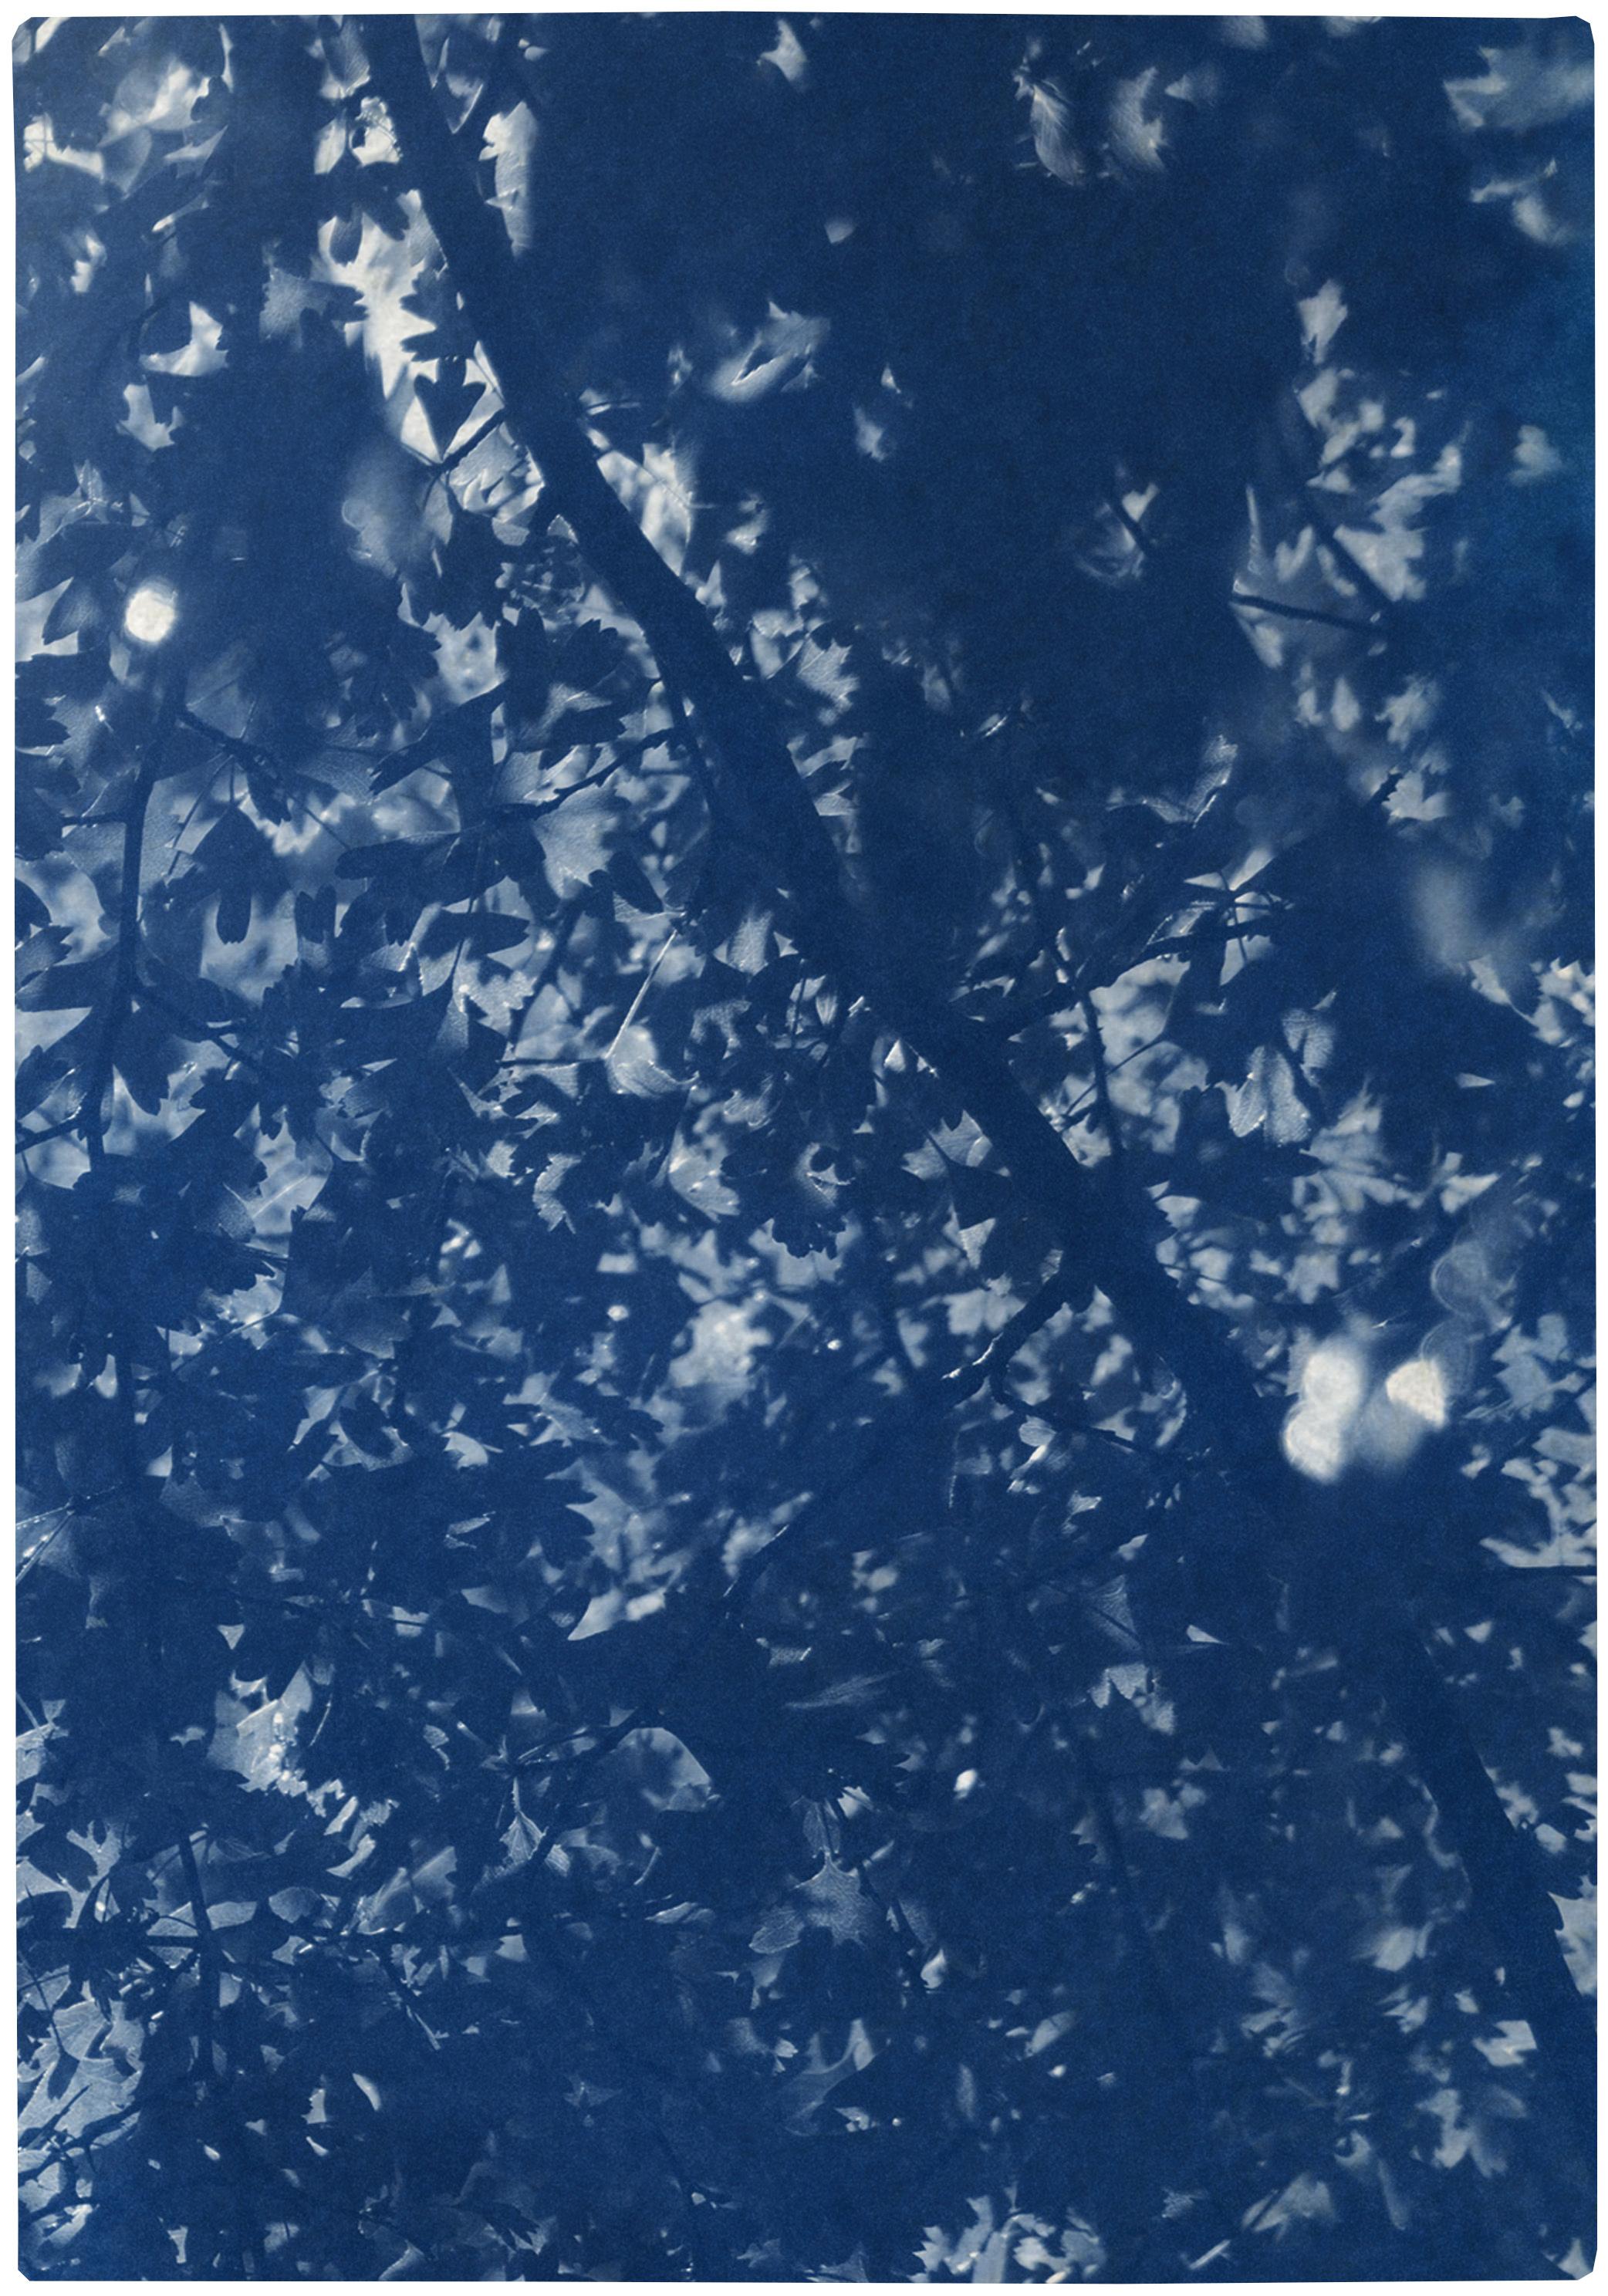 Sunlight Through Forest Branches, Blue Tones Triptych, Botanical Cyanotype Print 3